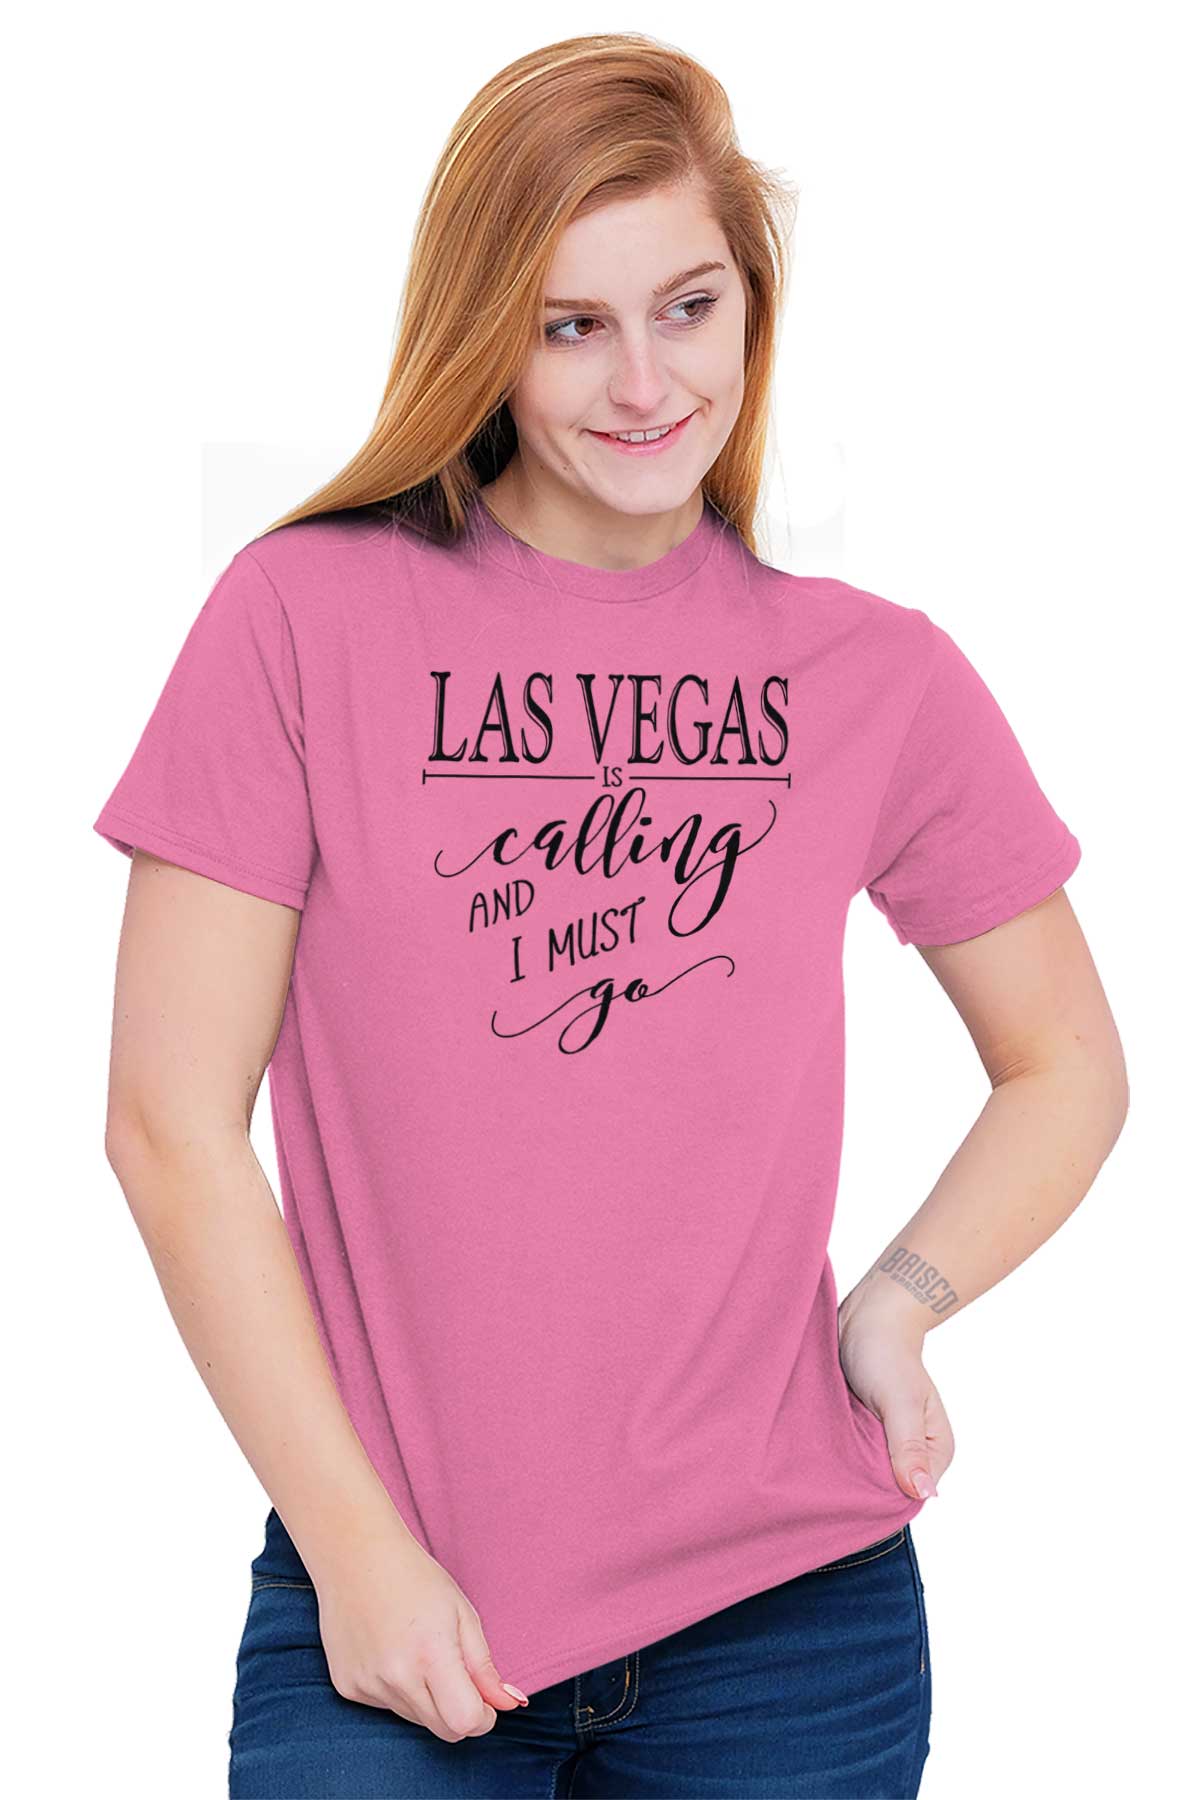 Las Vegas is Calling I Must Go Women's Graphic T Shirt Tees Brisco Brands M - image 5 of 6